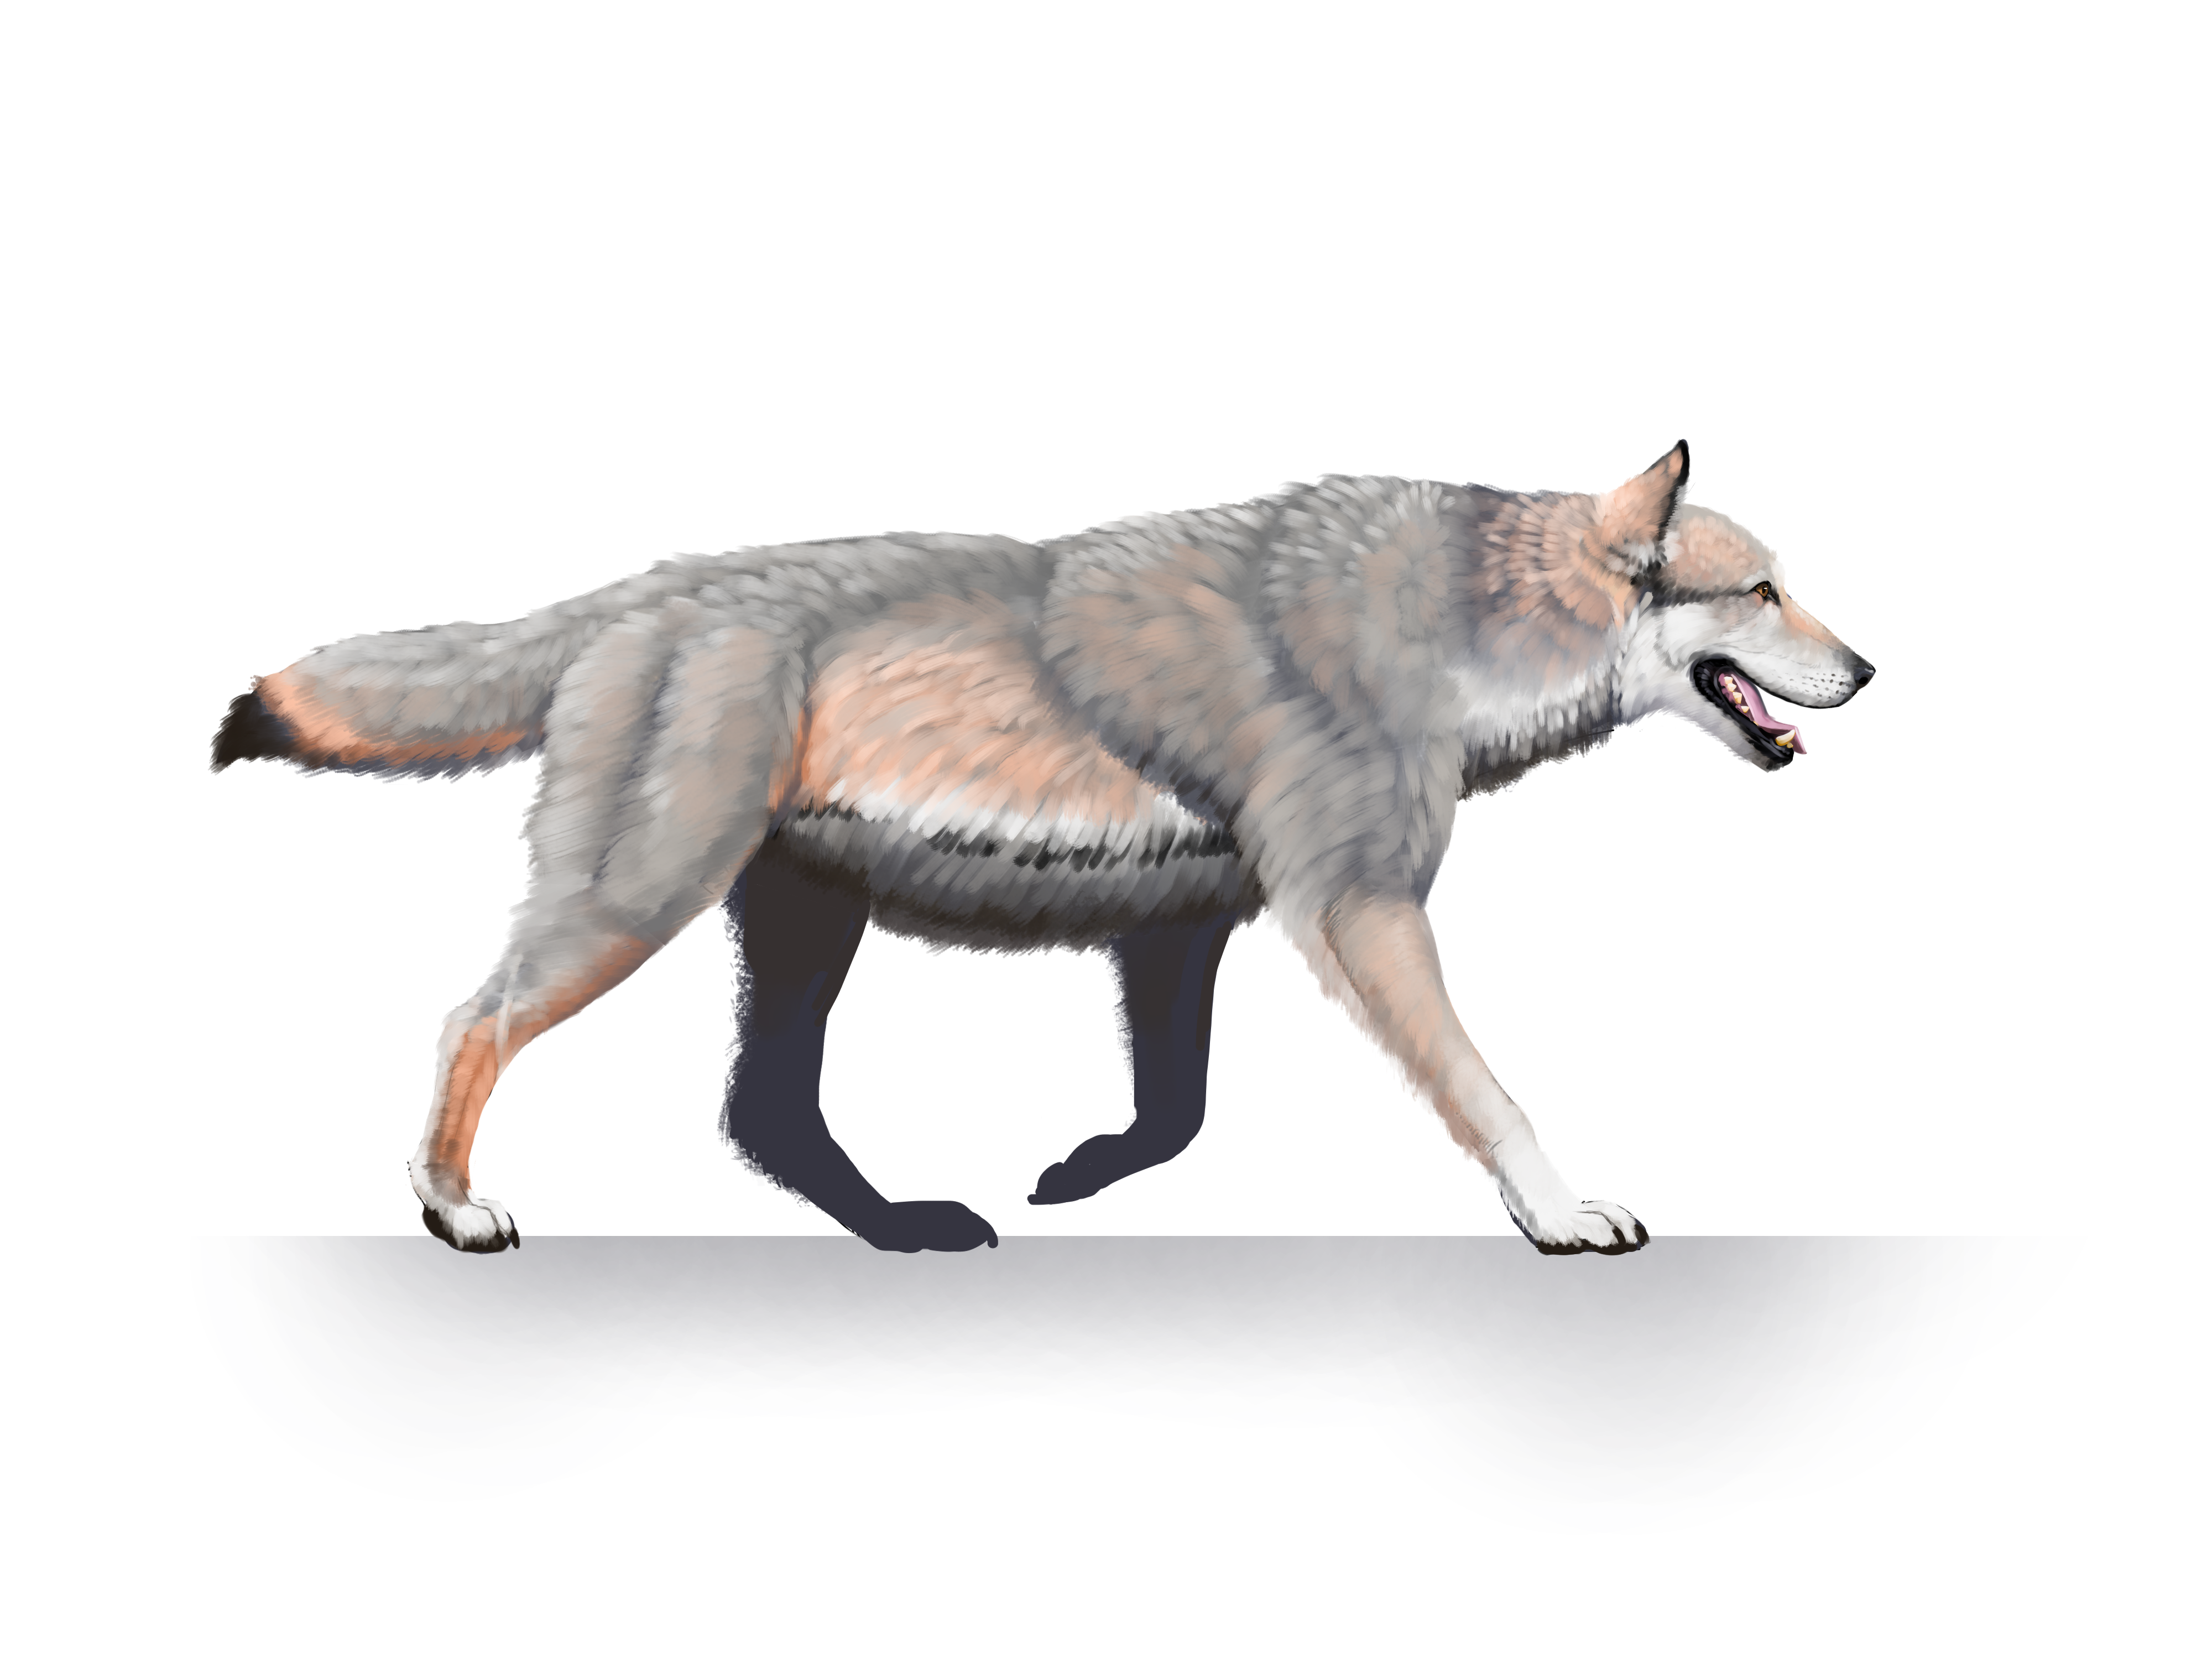 The dire wolf is a recent addition to the Pleistocene fauna found at Tule S...